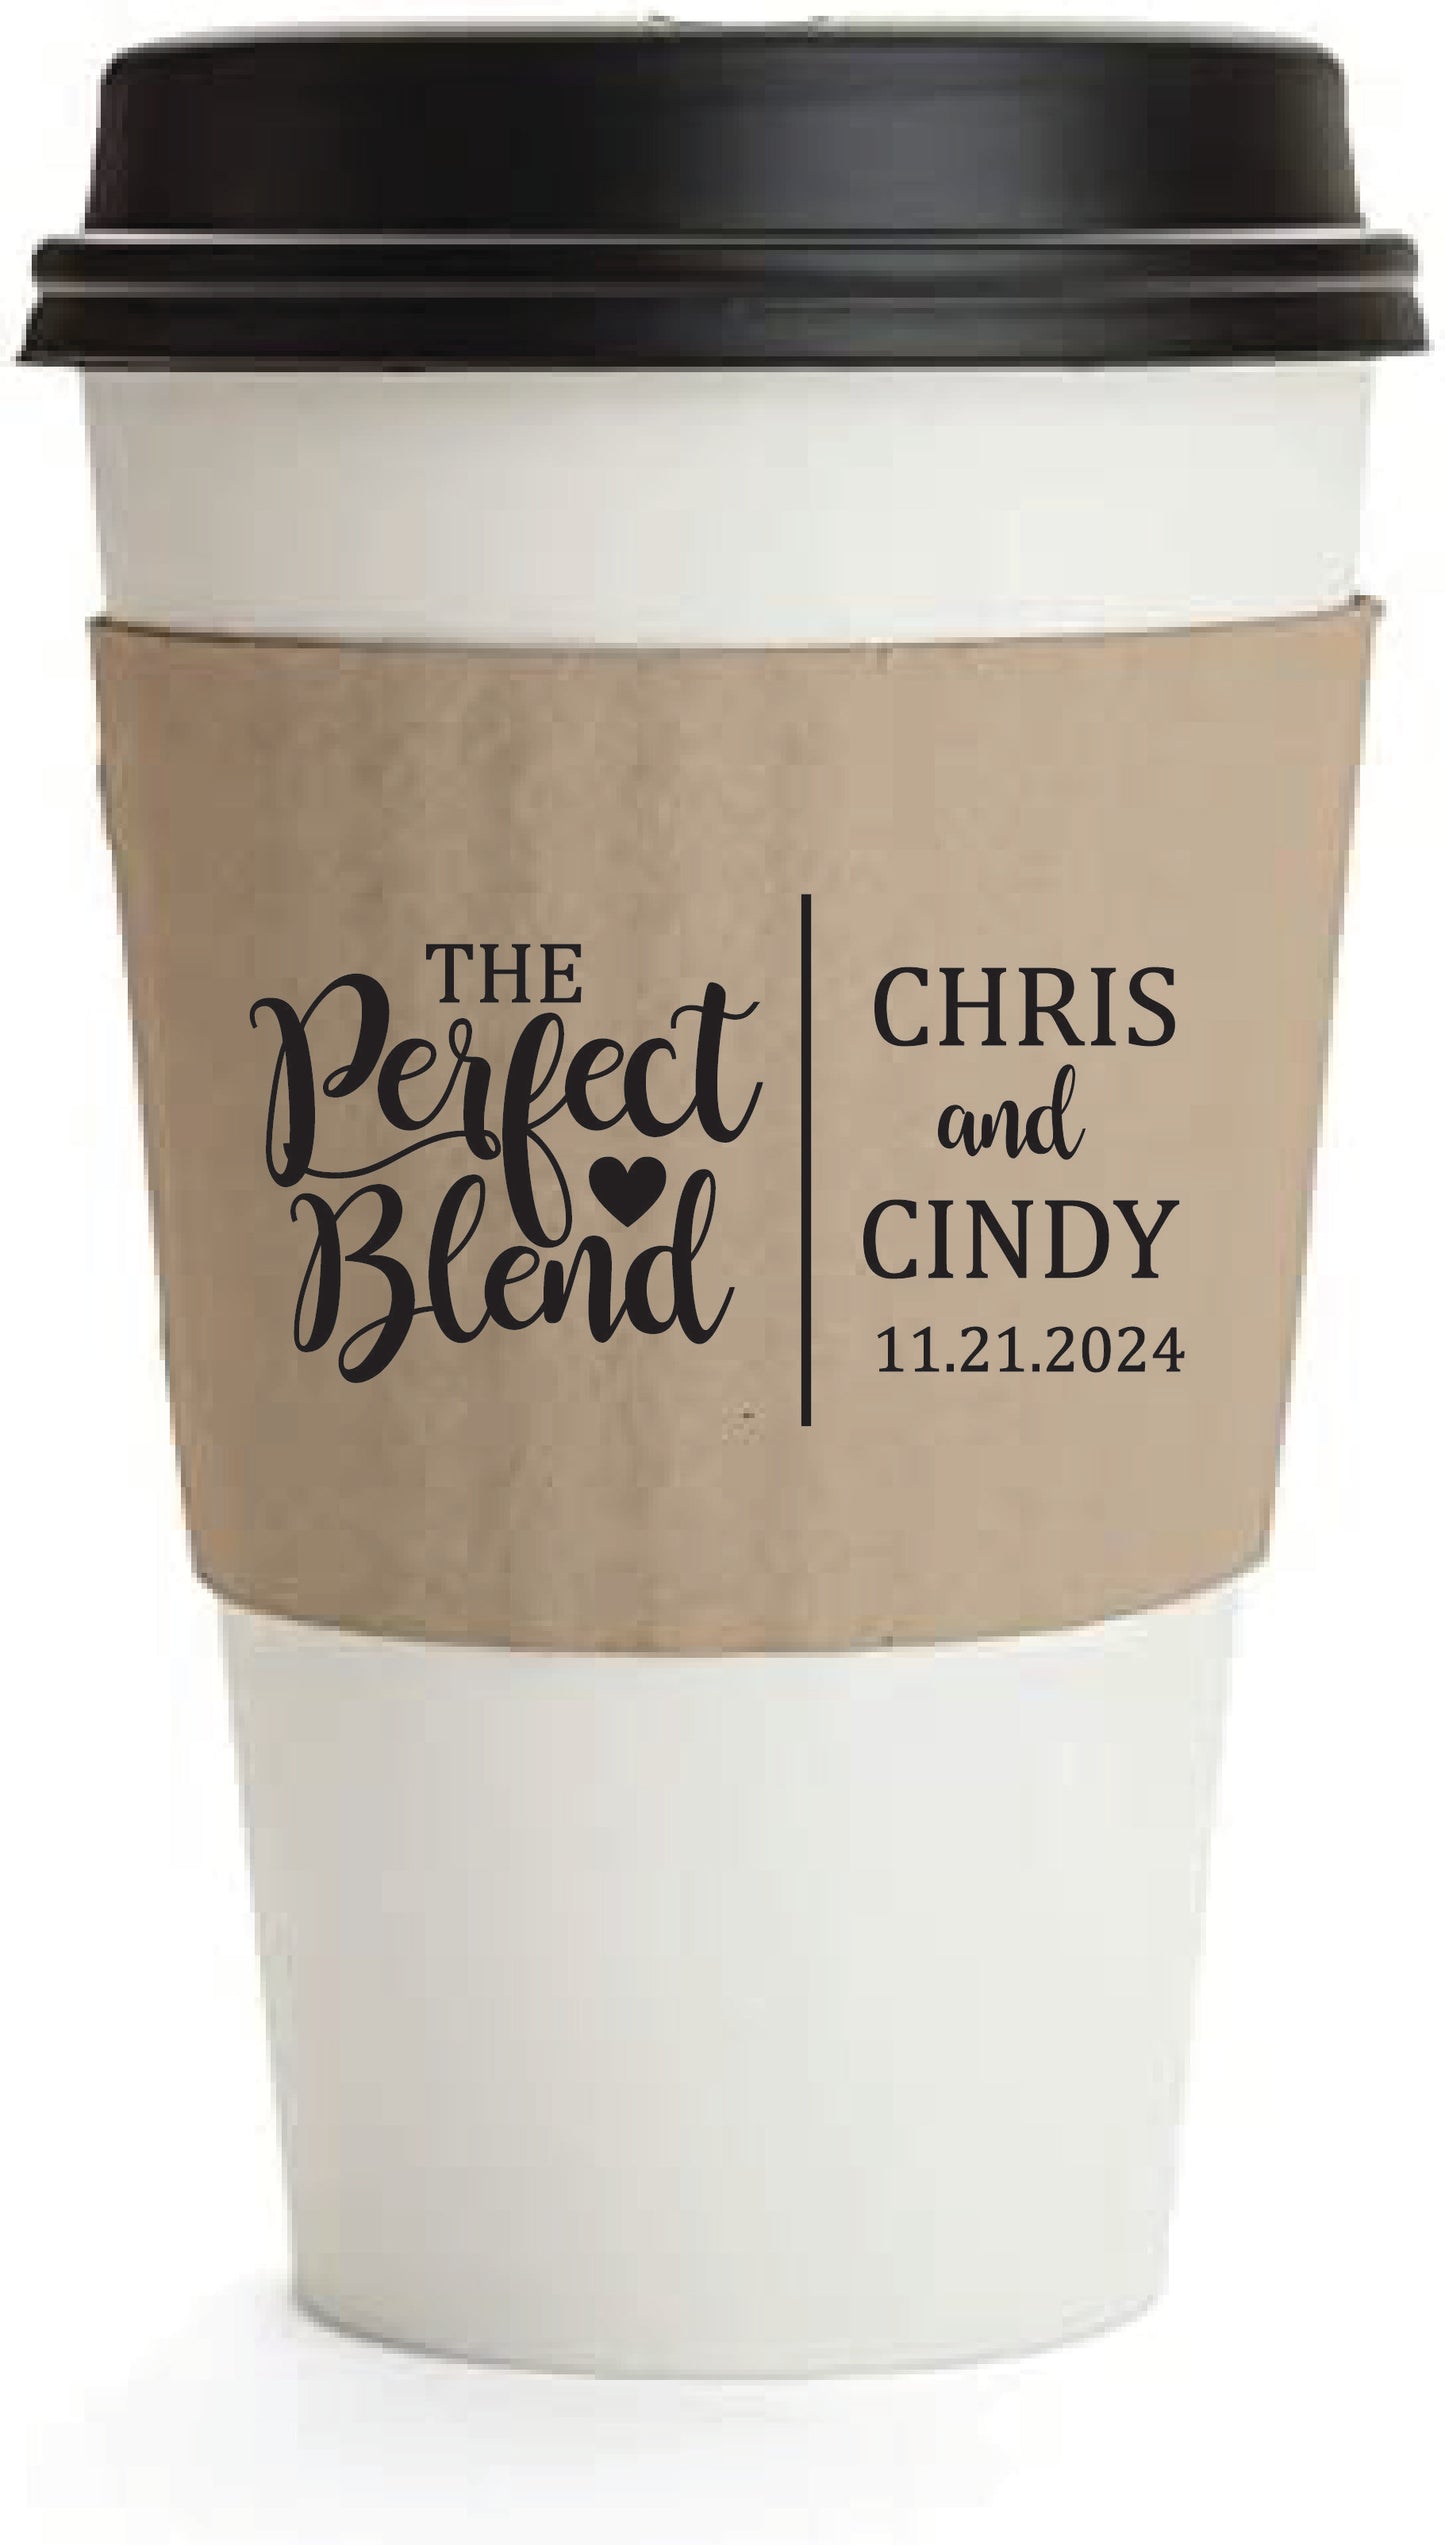 The perfect blend coffee sleeves